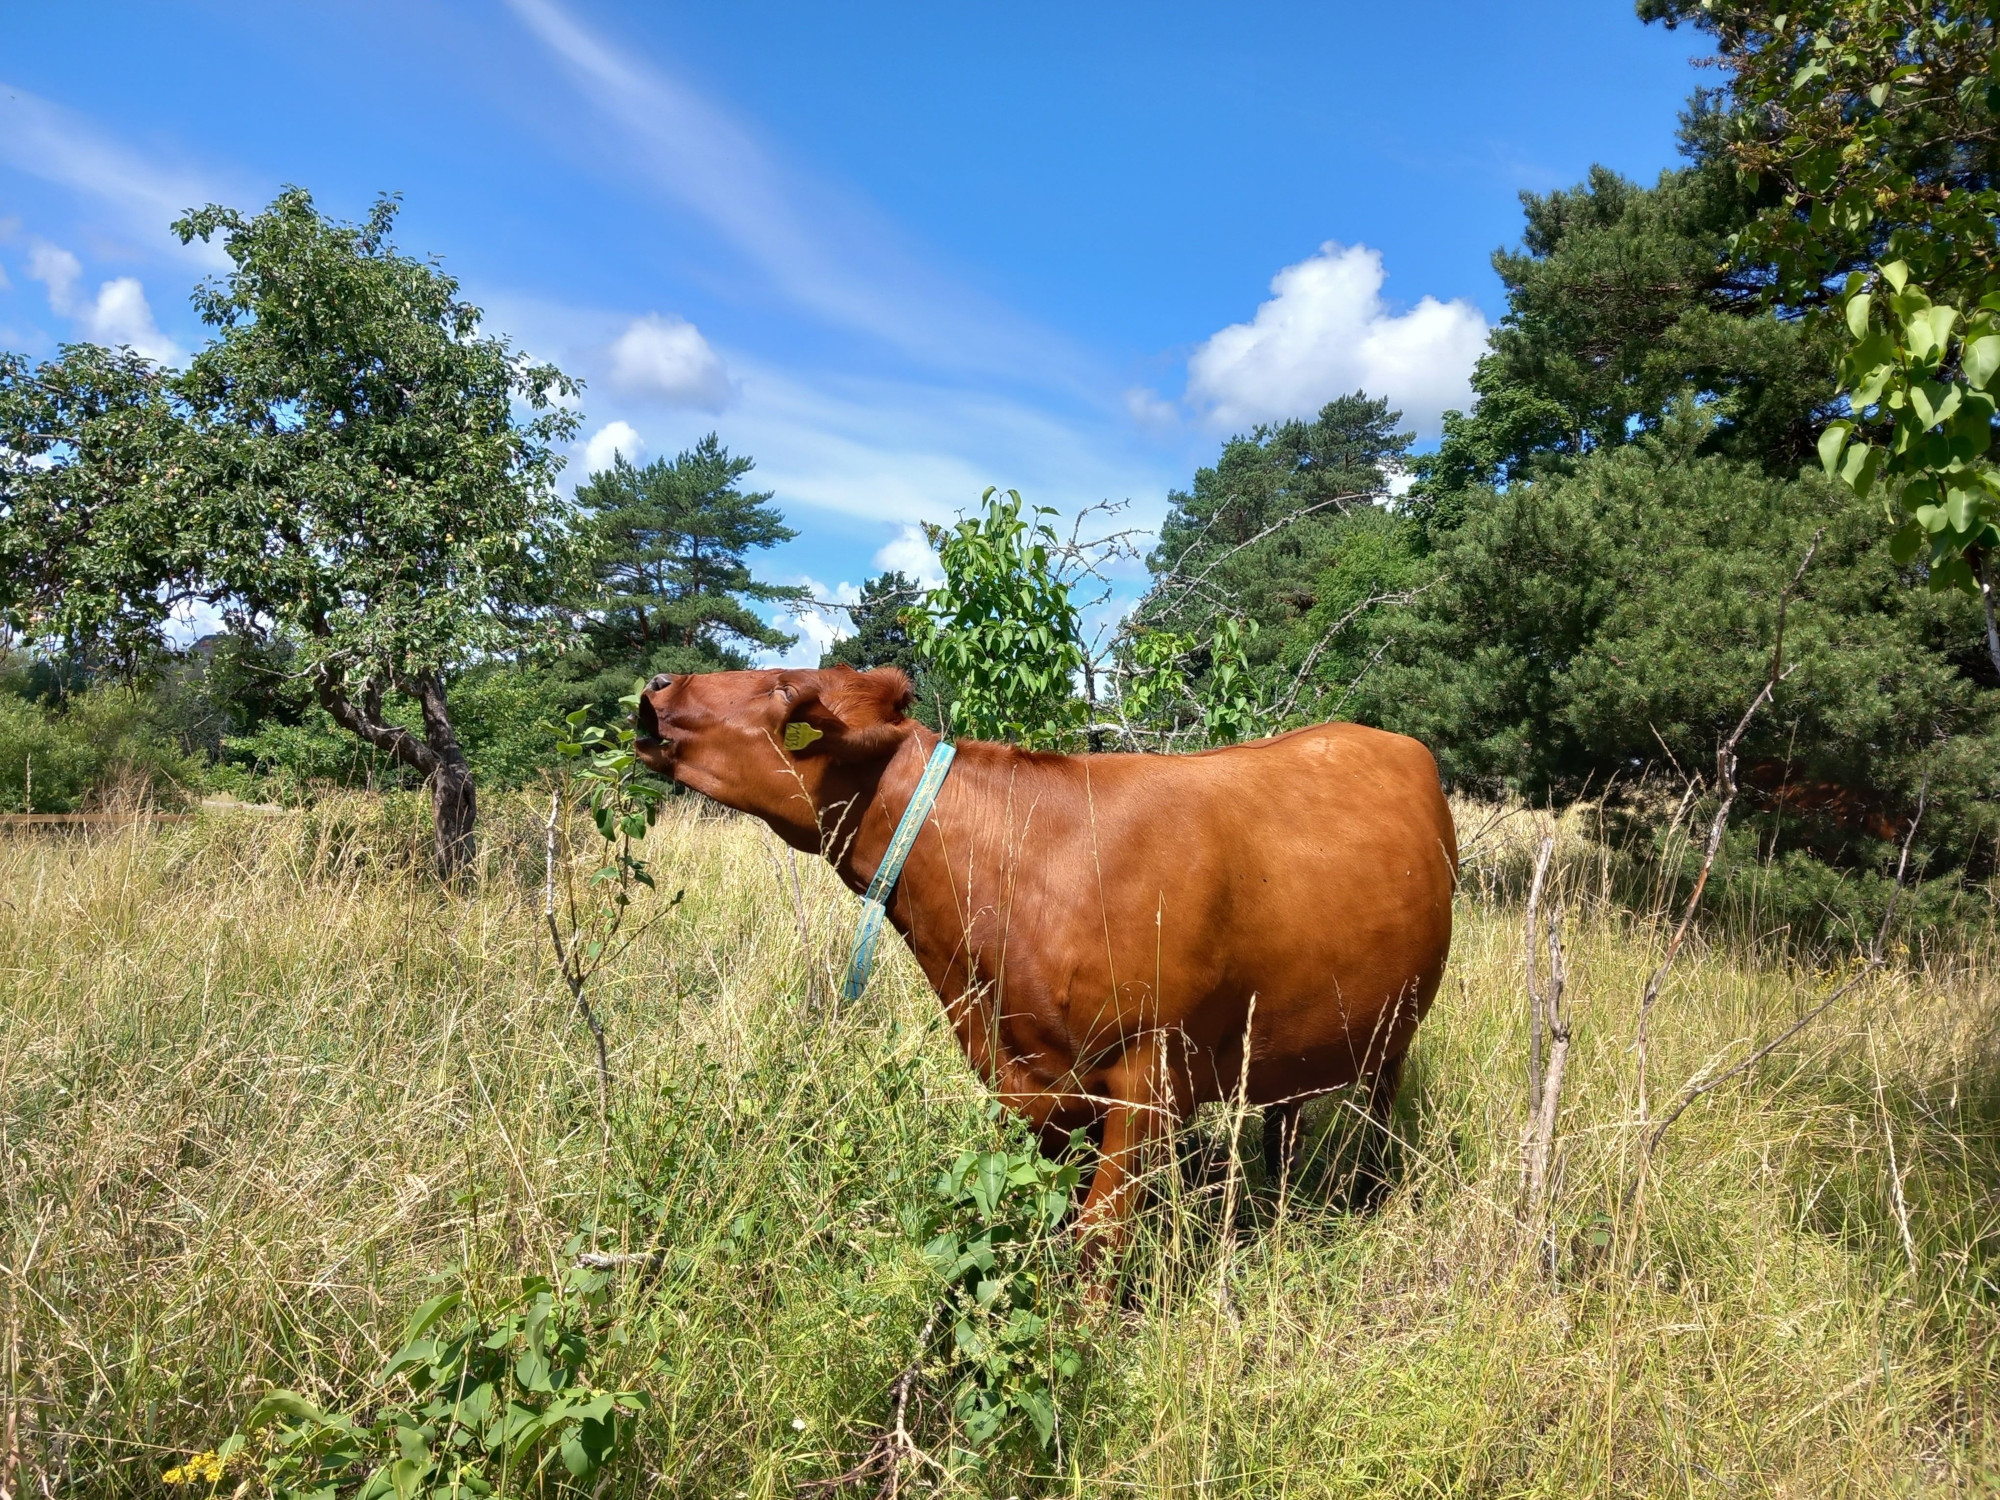 A Swedish Red Polled cow eating leaves under a blue sky. (Photo: Martin Johnsson. License: cc-by 4.0)